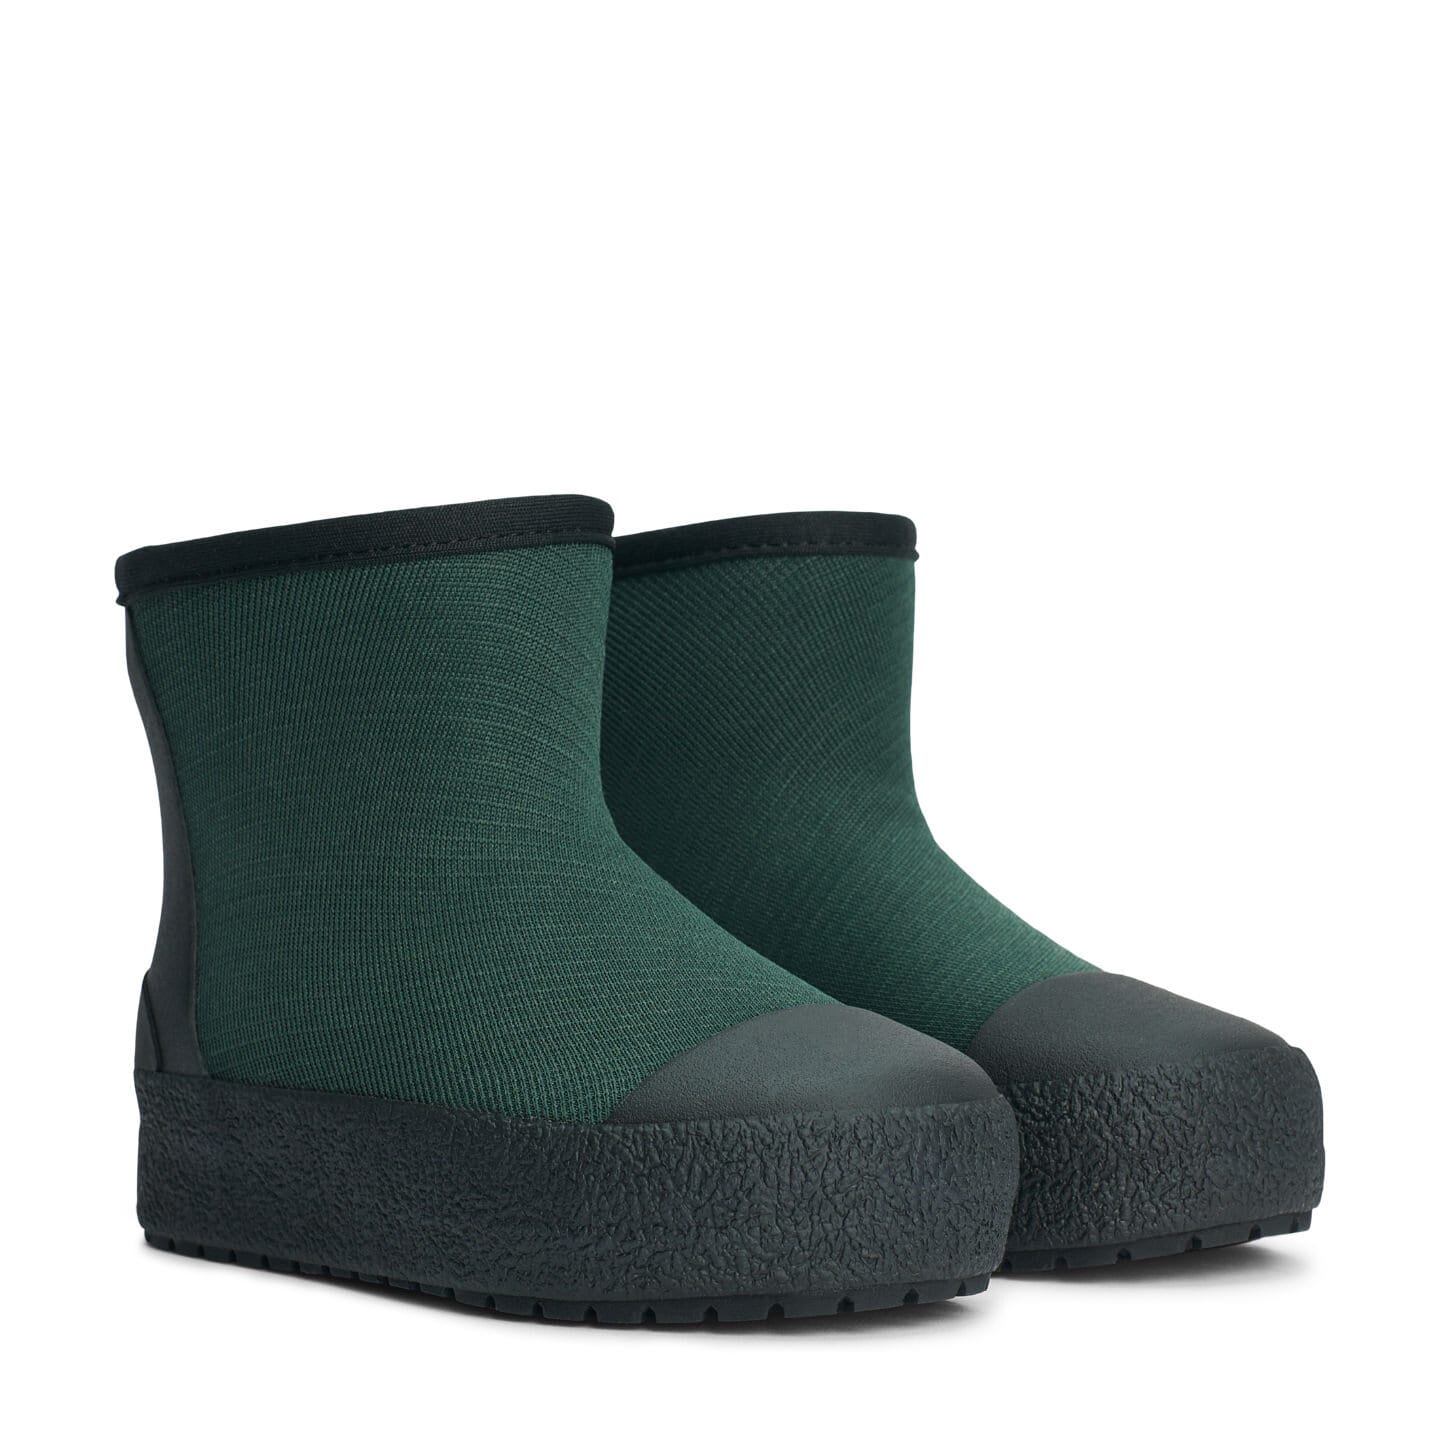 Arch Hybrid JR waterproof boot for juniors in the colour green